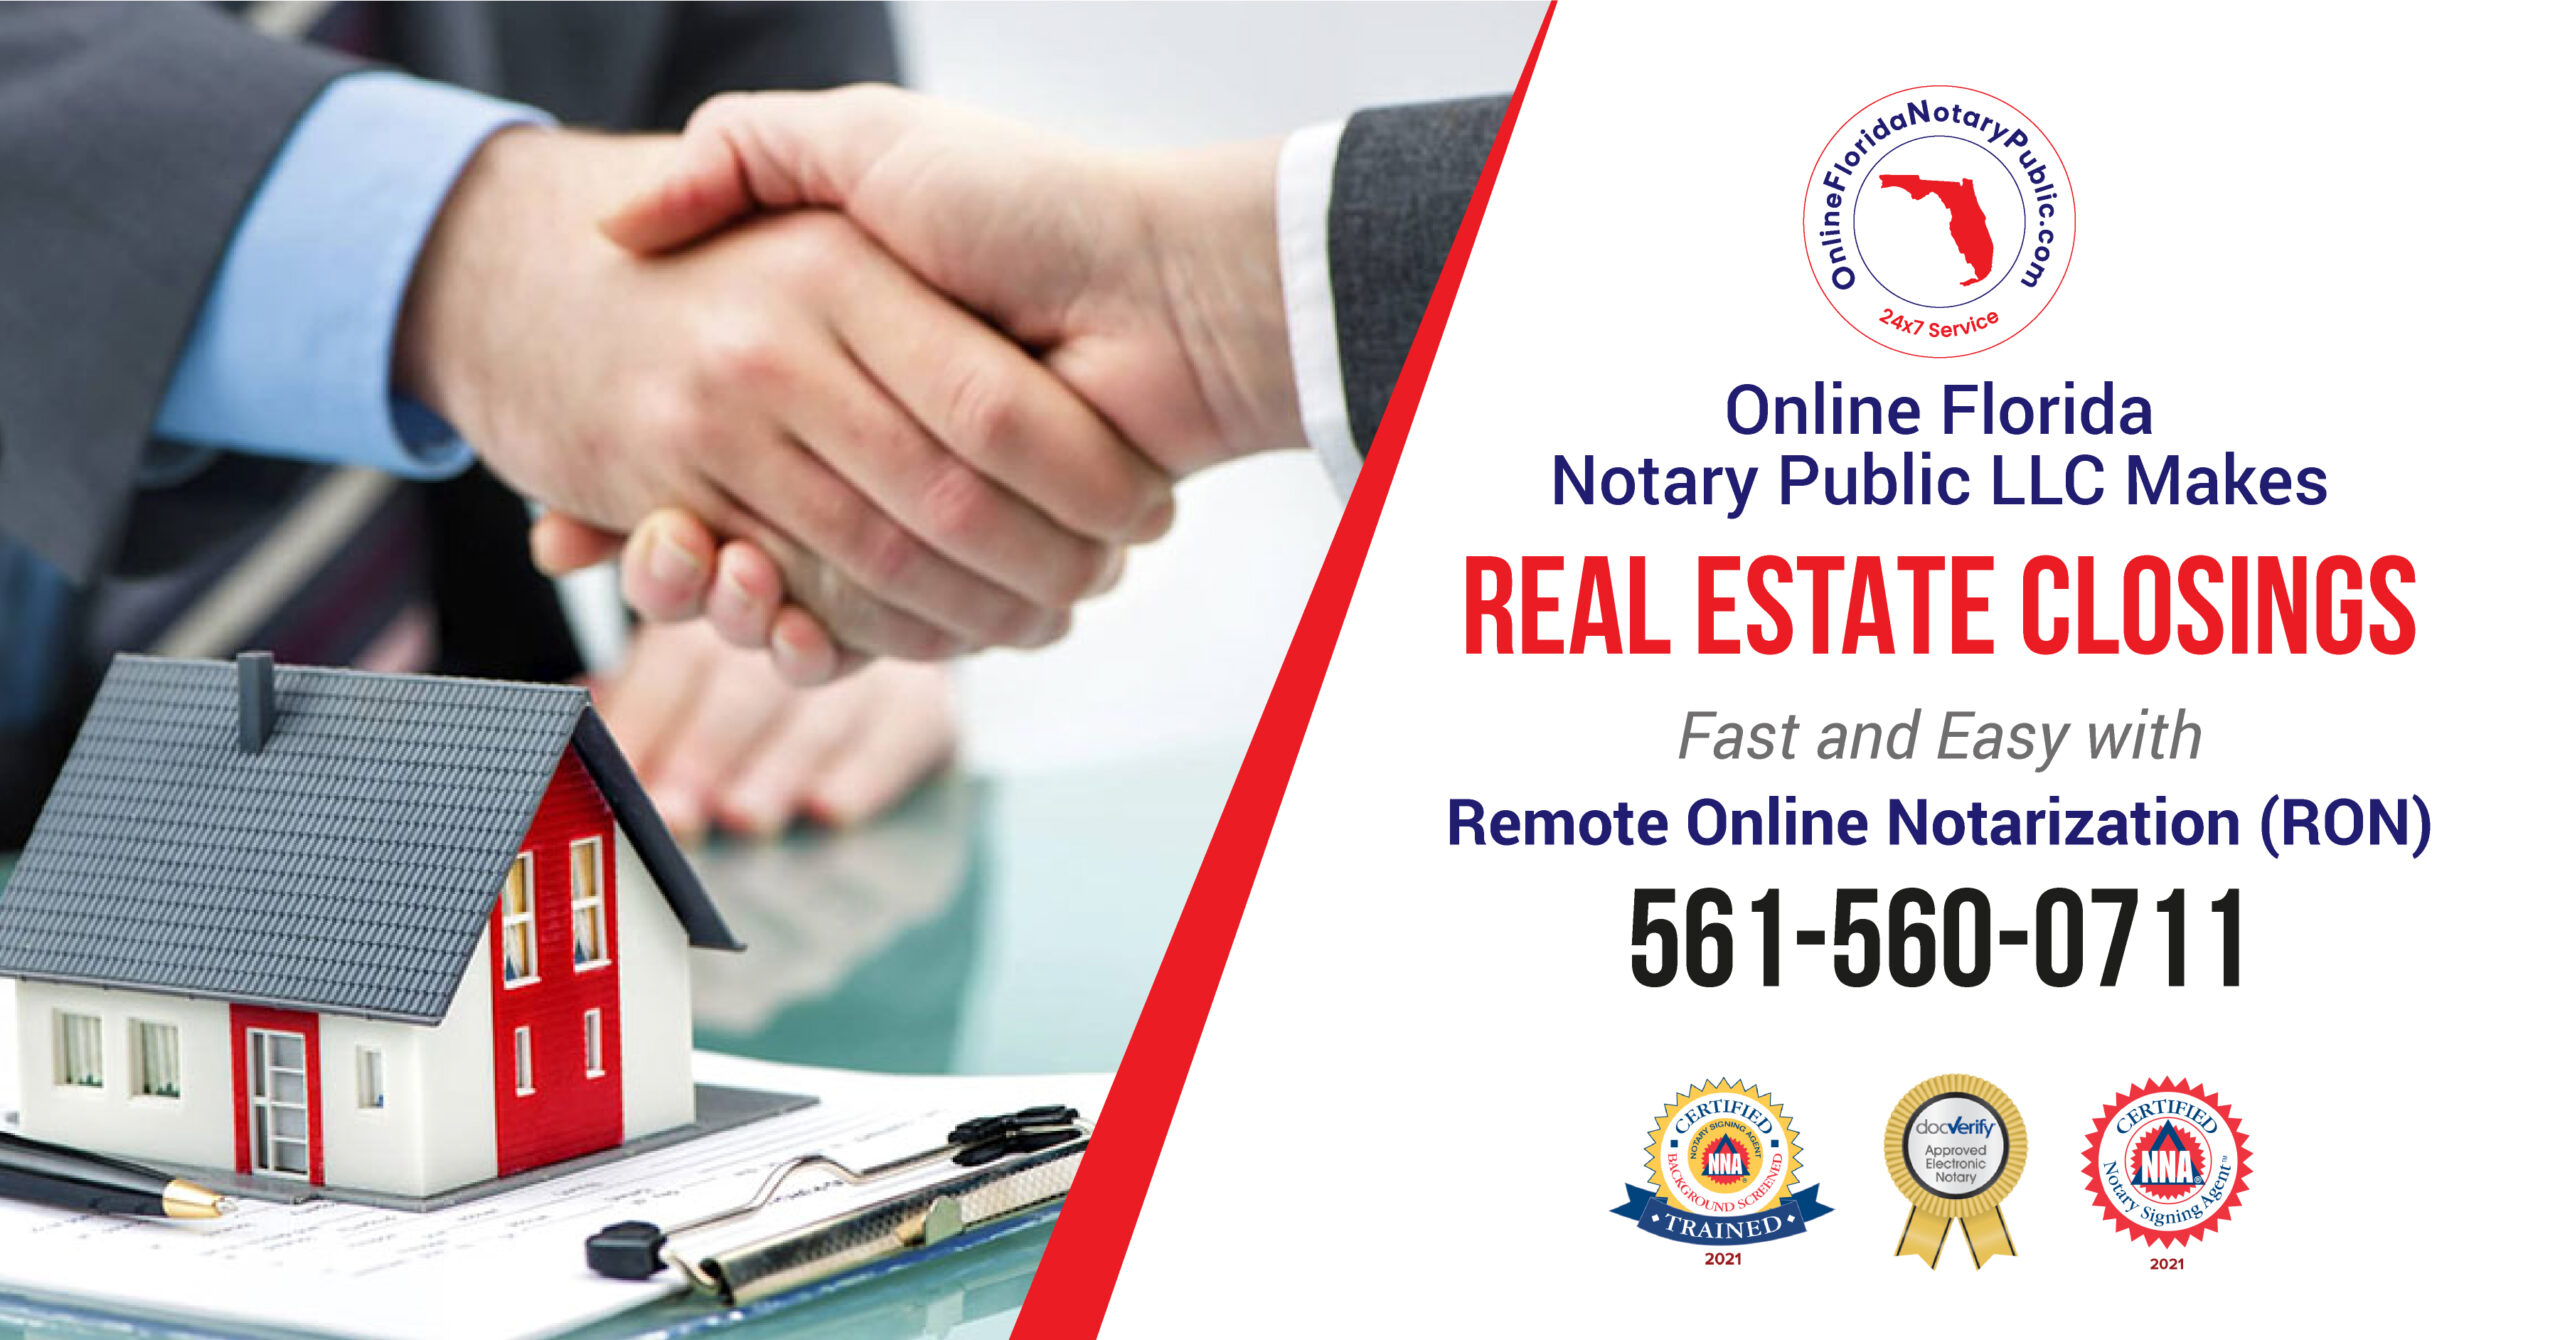 Online Florida Notary Public - Real Estate Closings